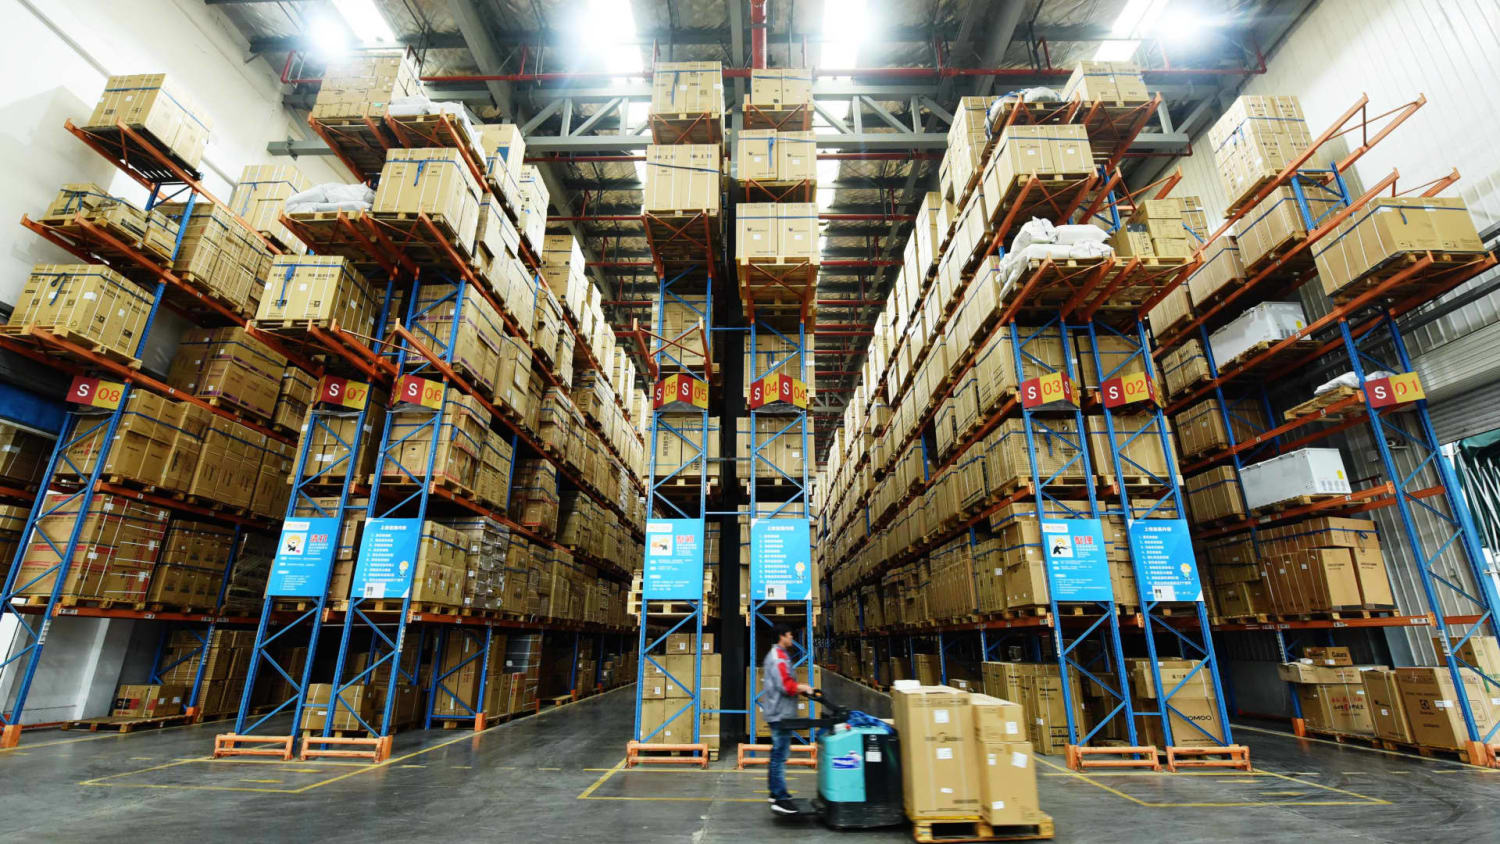 'Underdeveloped' warehousing in China could be an opportunity for real estate investors